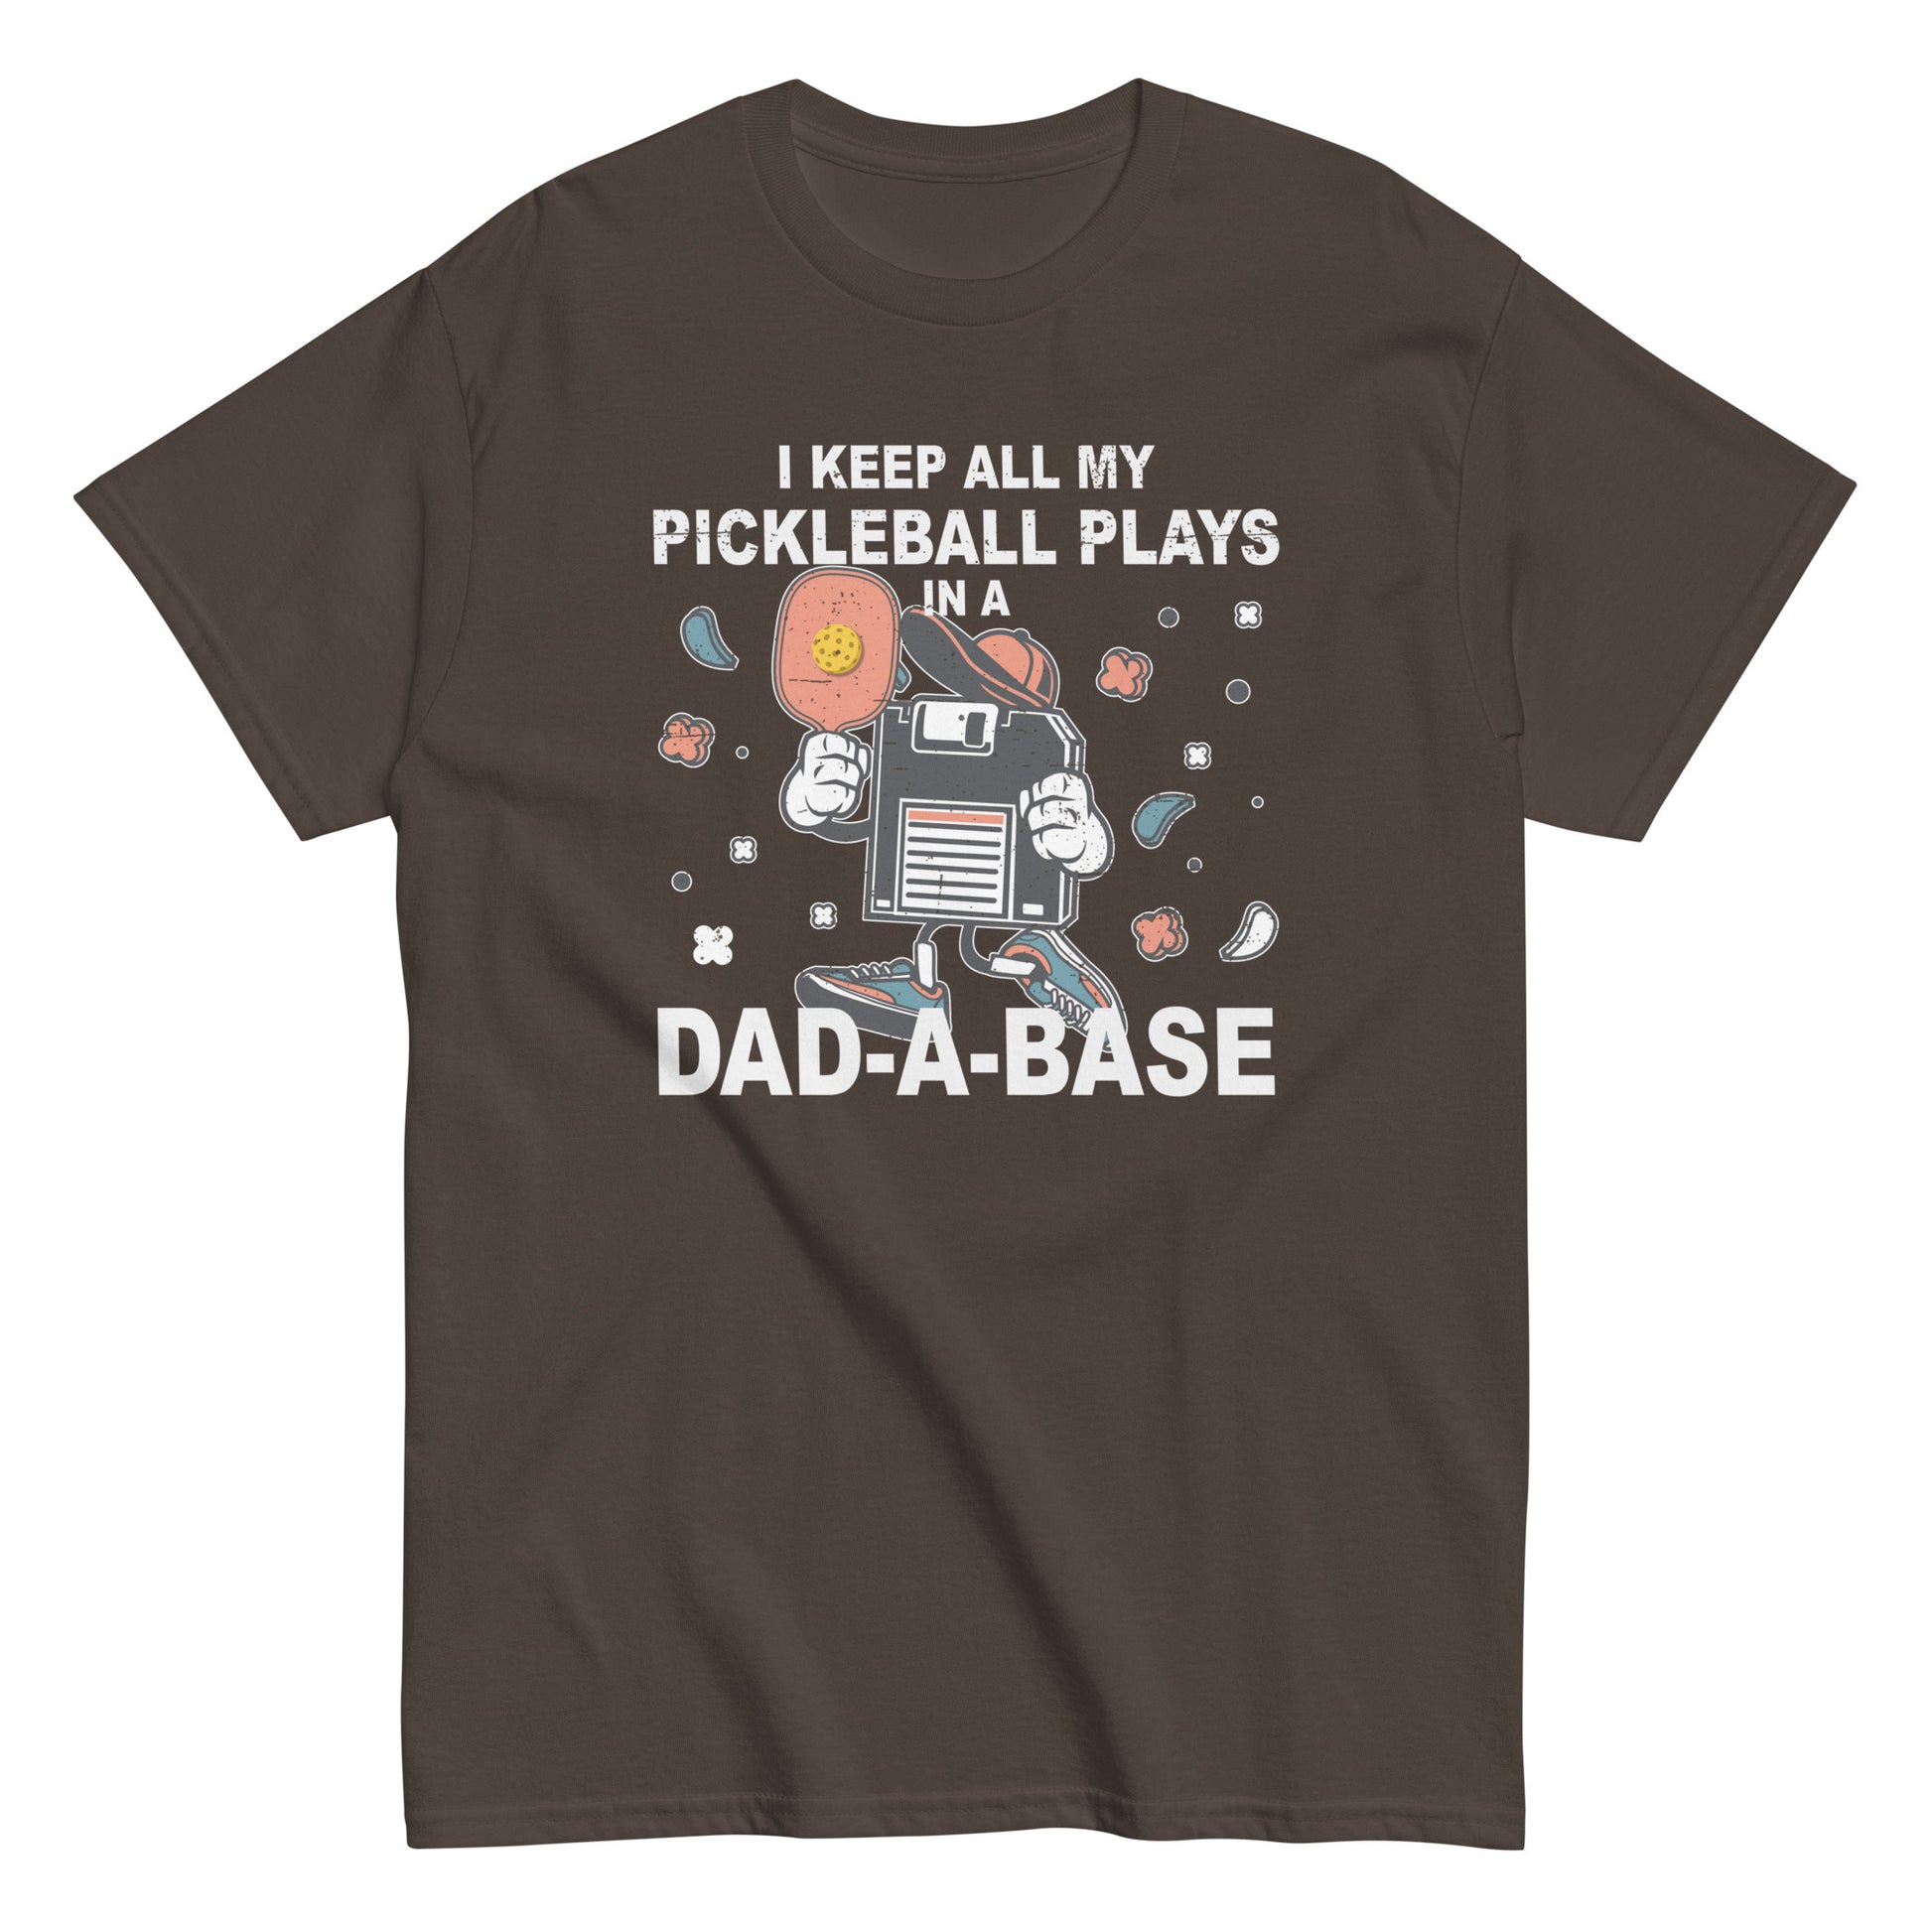 Retro Pickleball Pun: "I Keep All My Pickleball Plays In A Dad-A-Base", Father's Day Mens Dark Chocolate T-Shirt